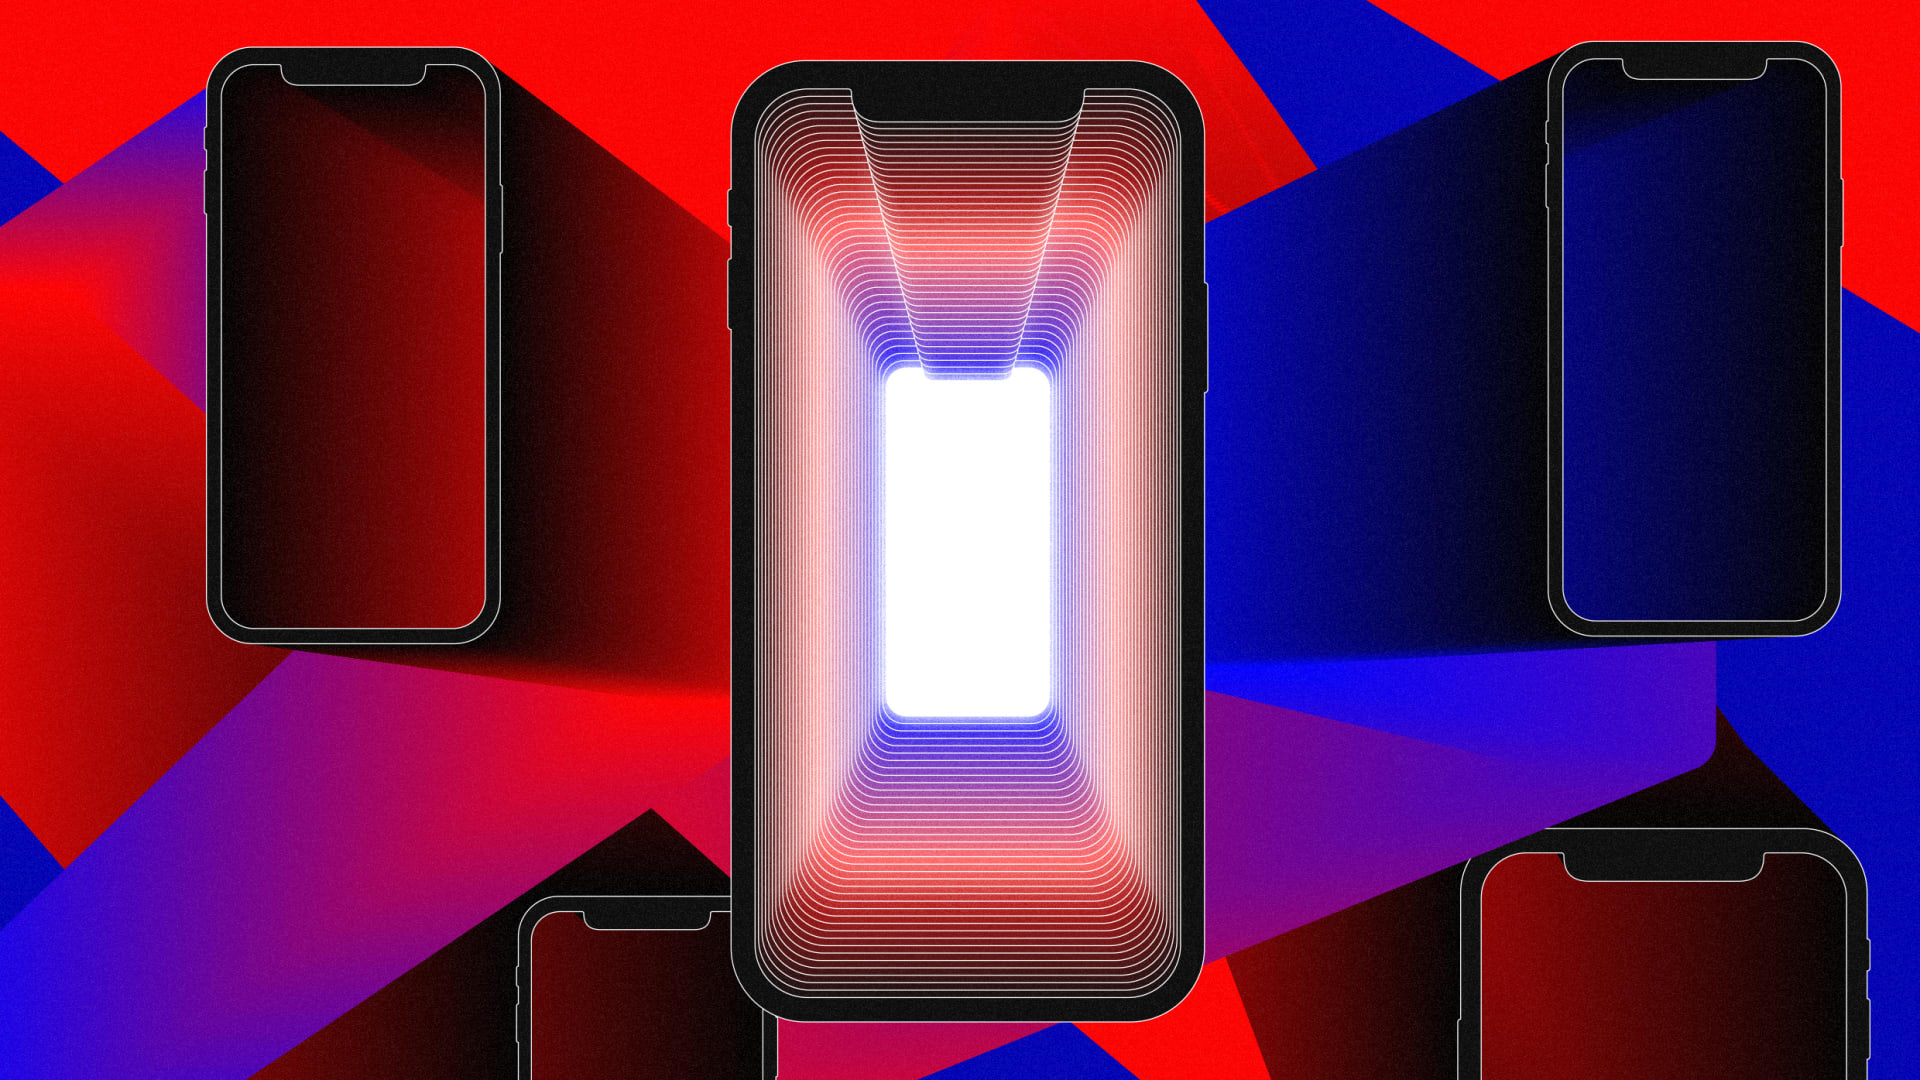 Federal judge responds to iPhone notch design lawsuit with brutal one-liner